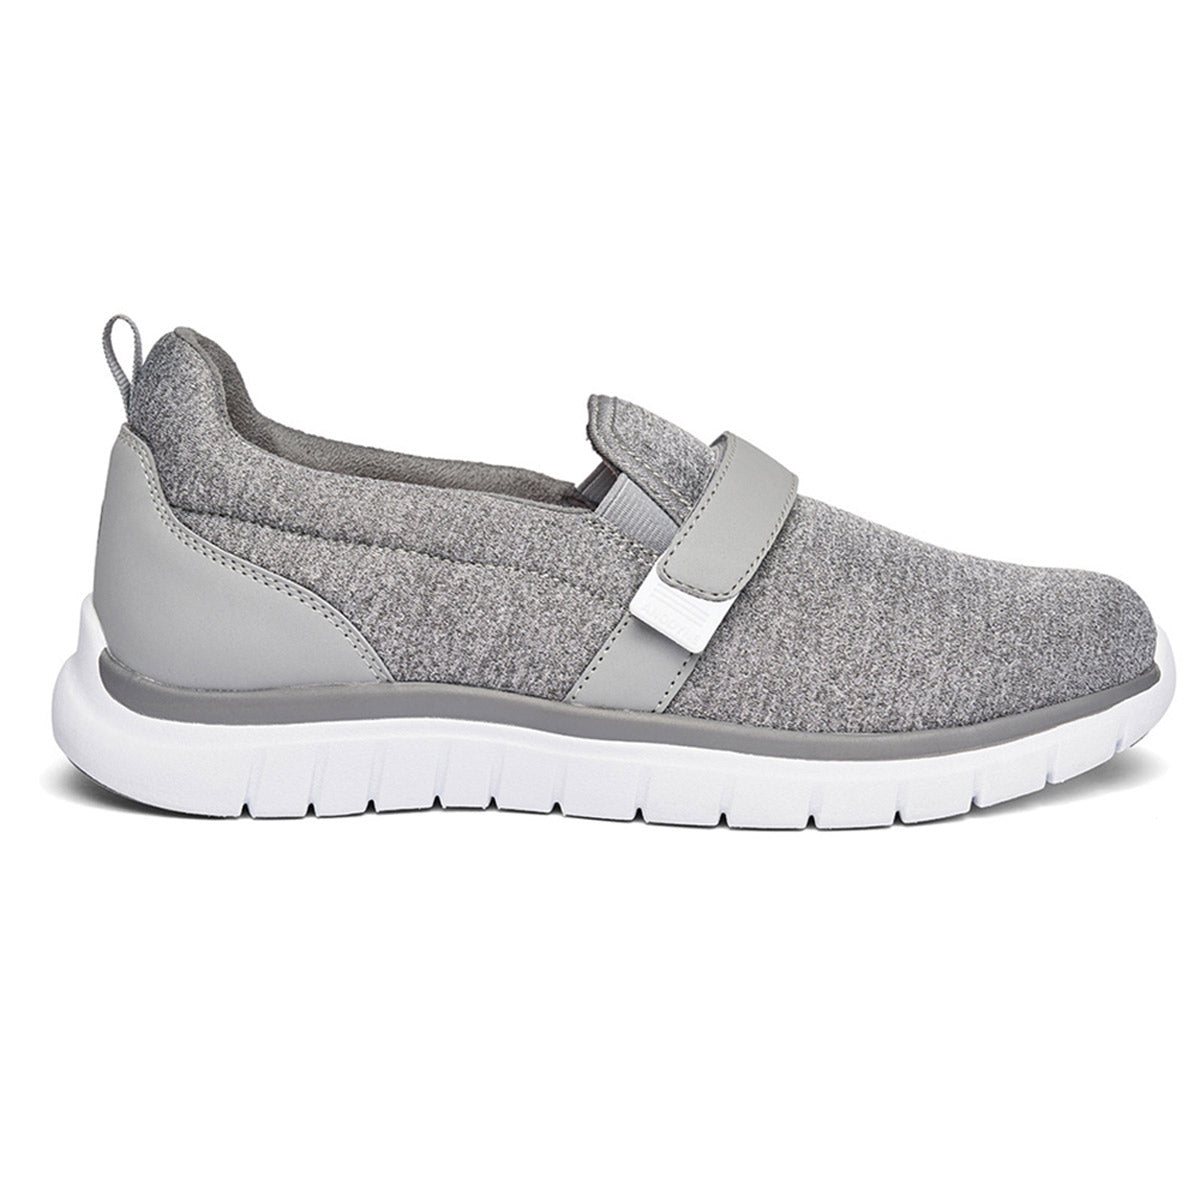 Anodyne gray slip-on sport trainer with a hook-and-loop strap and white sole, designed for orthopedic inserts.